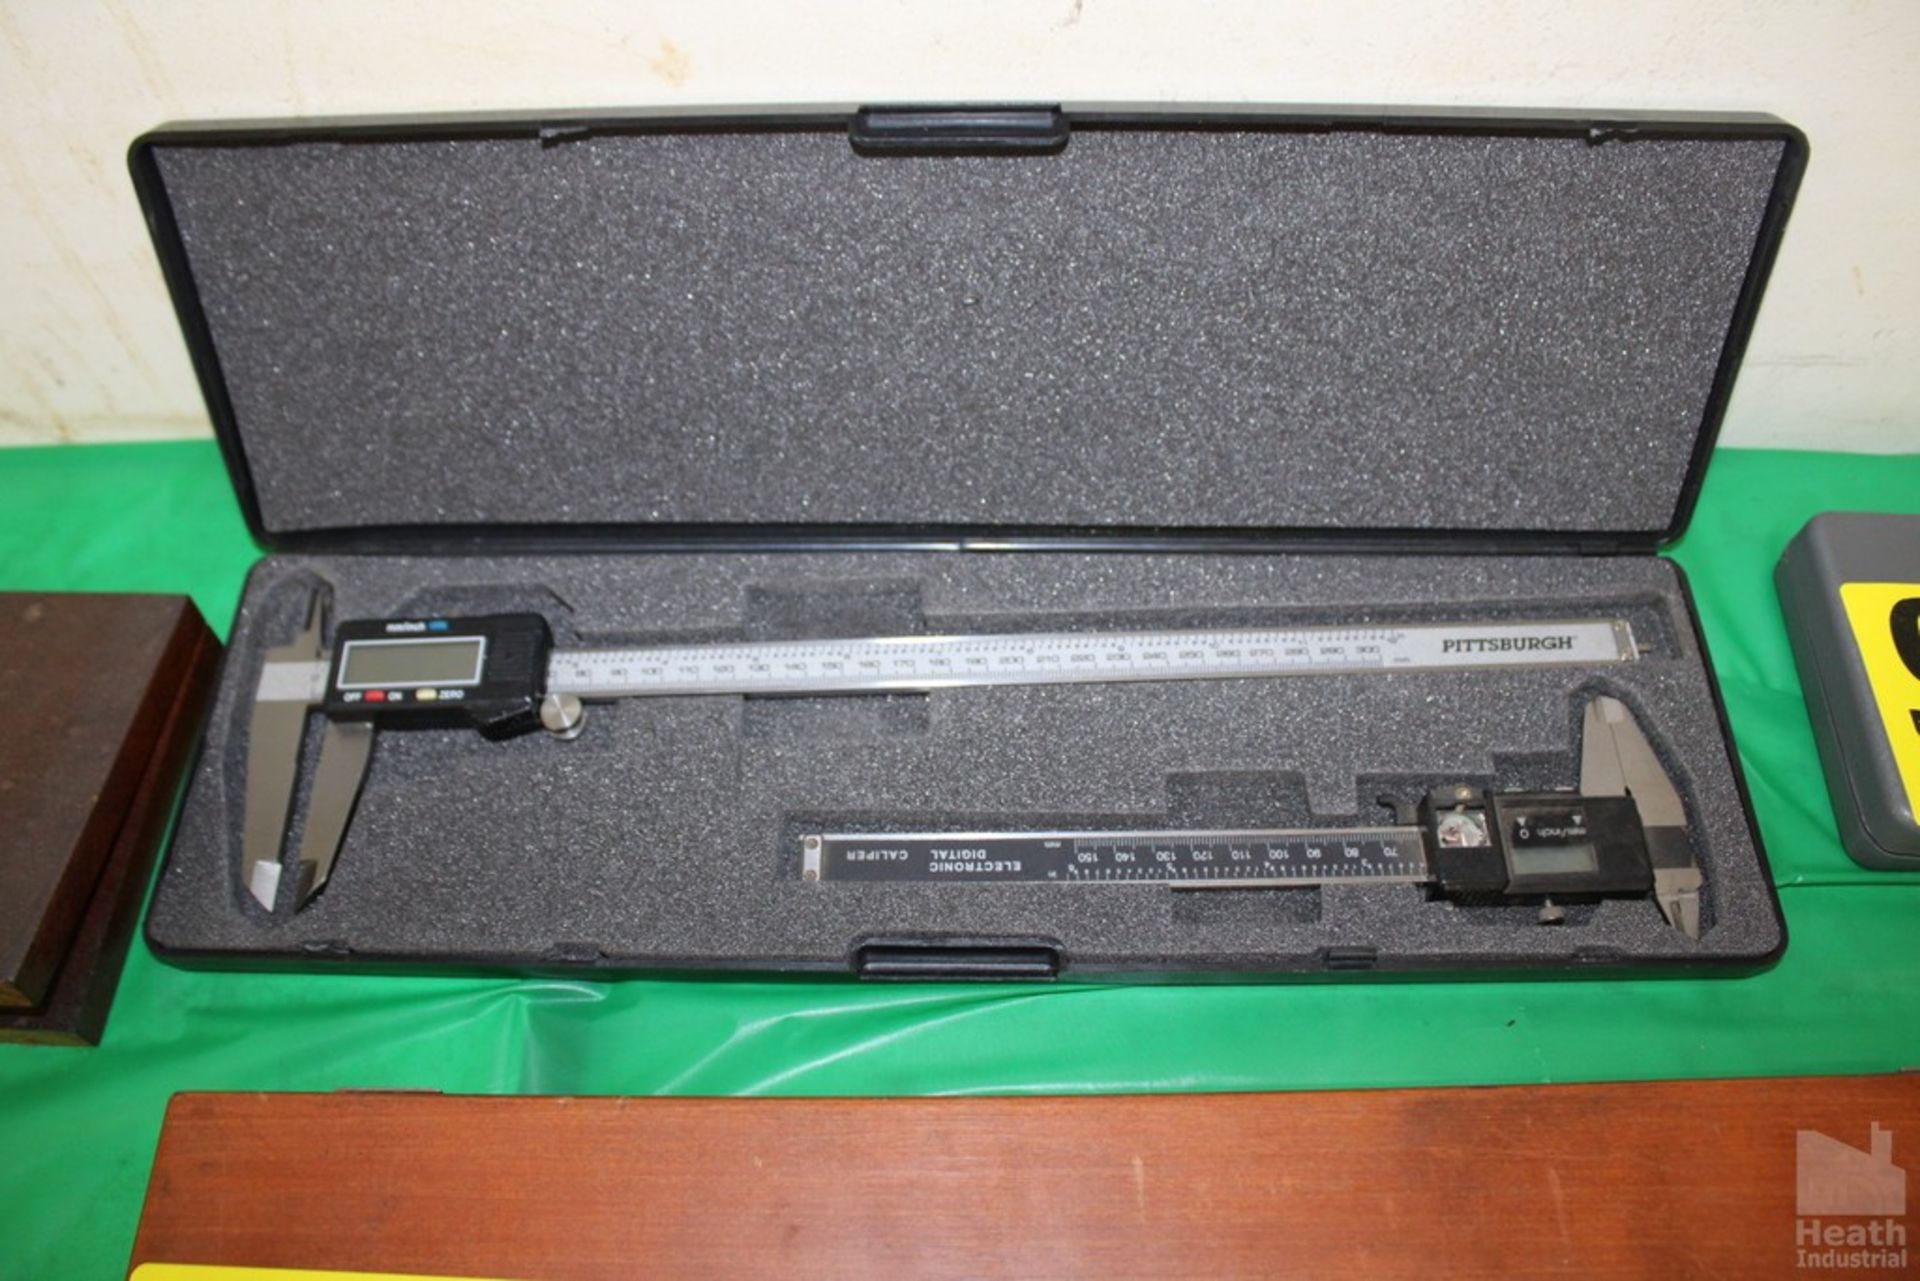 PITTSBURG TWO PIECE DIGITAL CALIPER SET 6" AND 12"